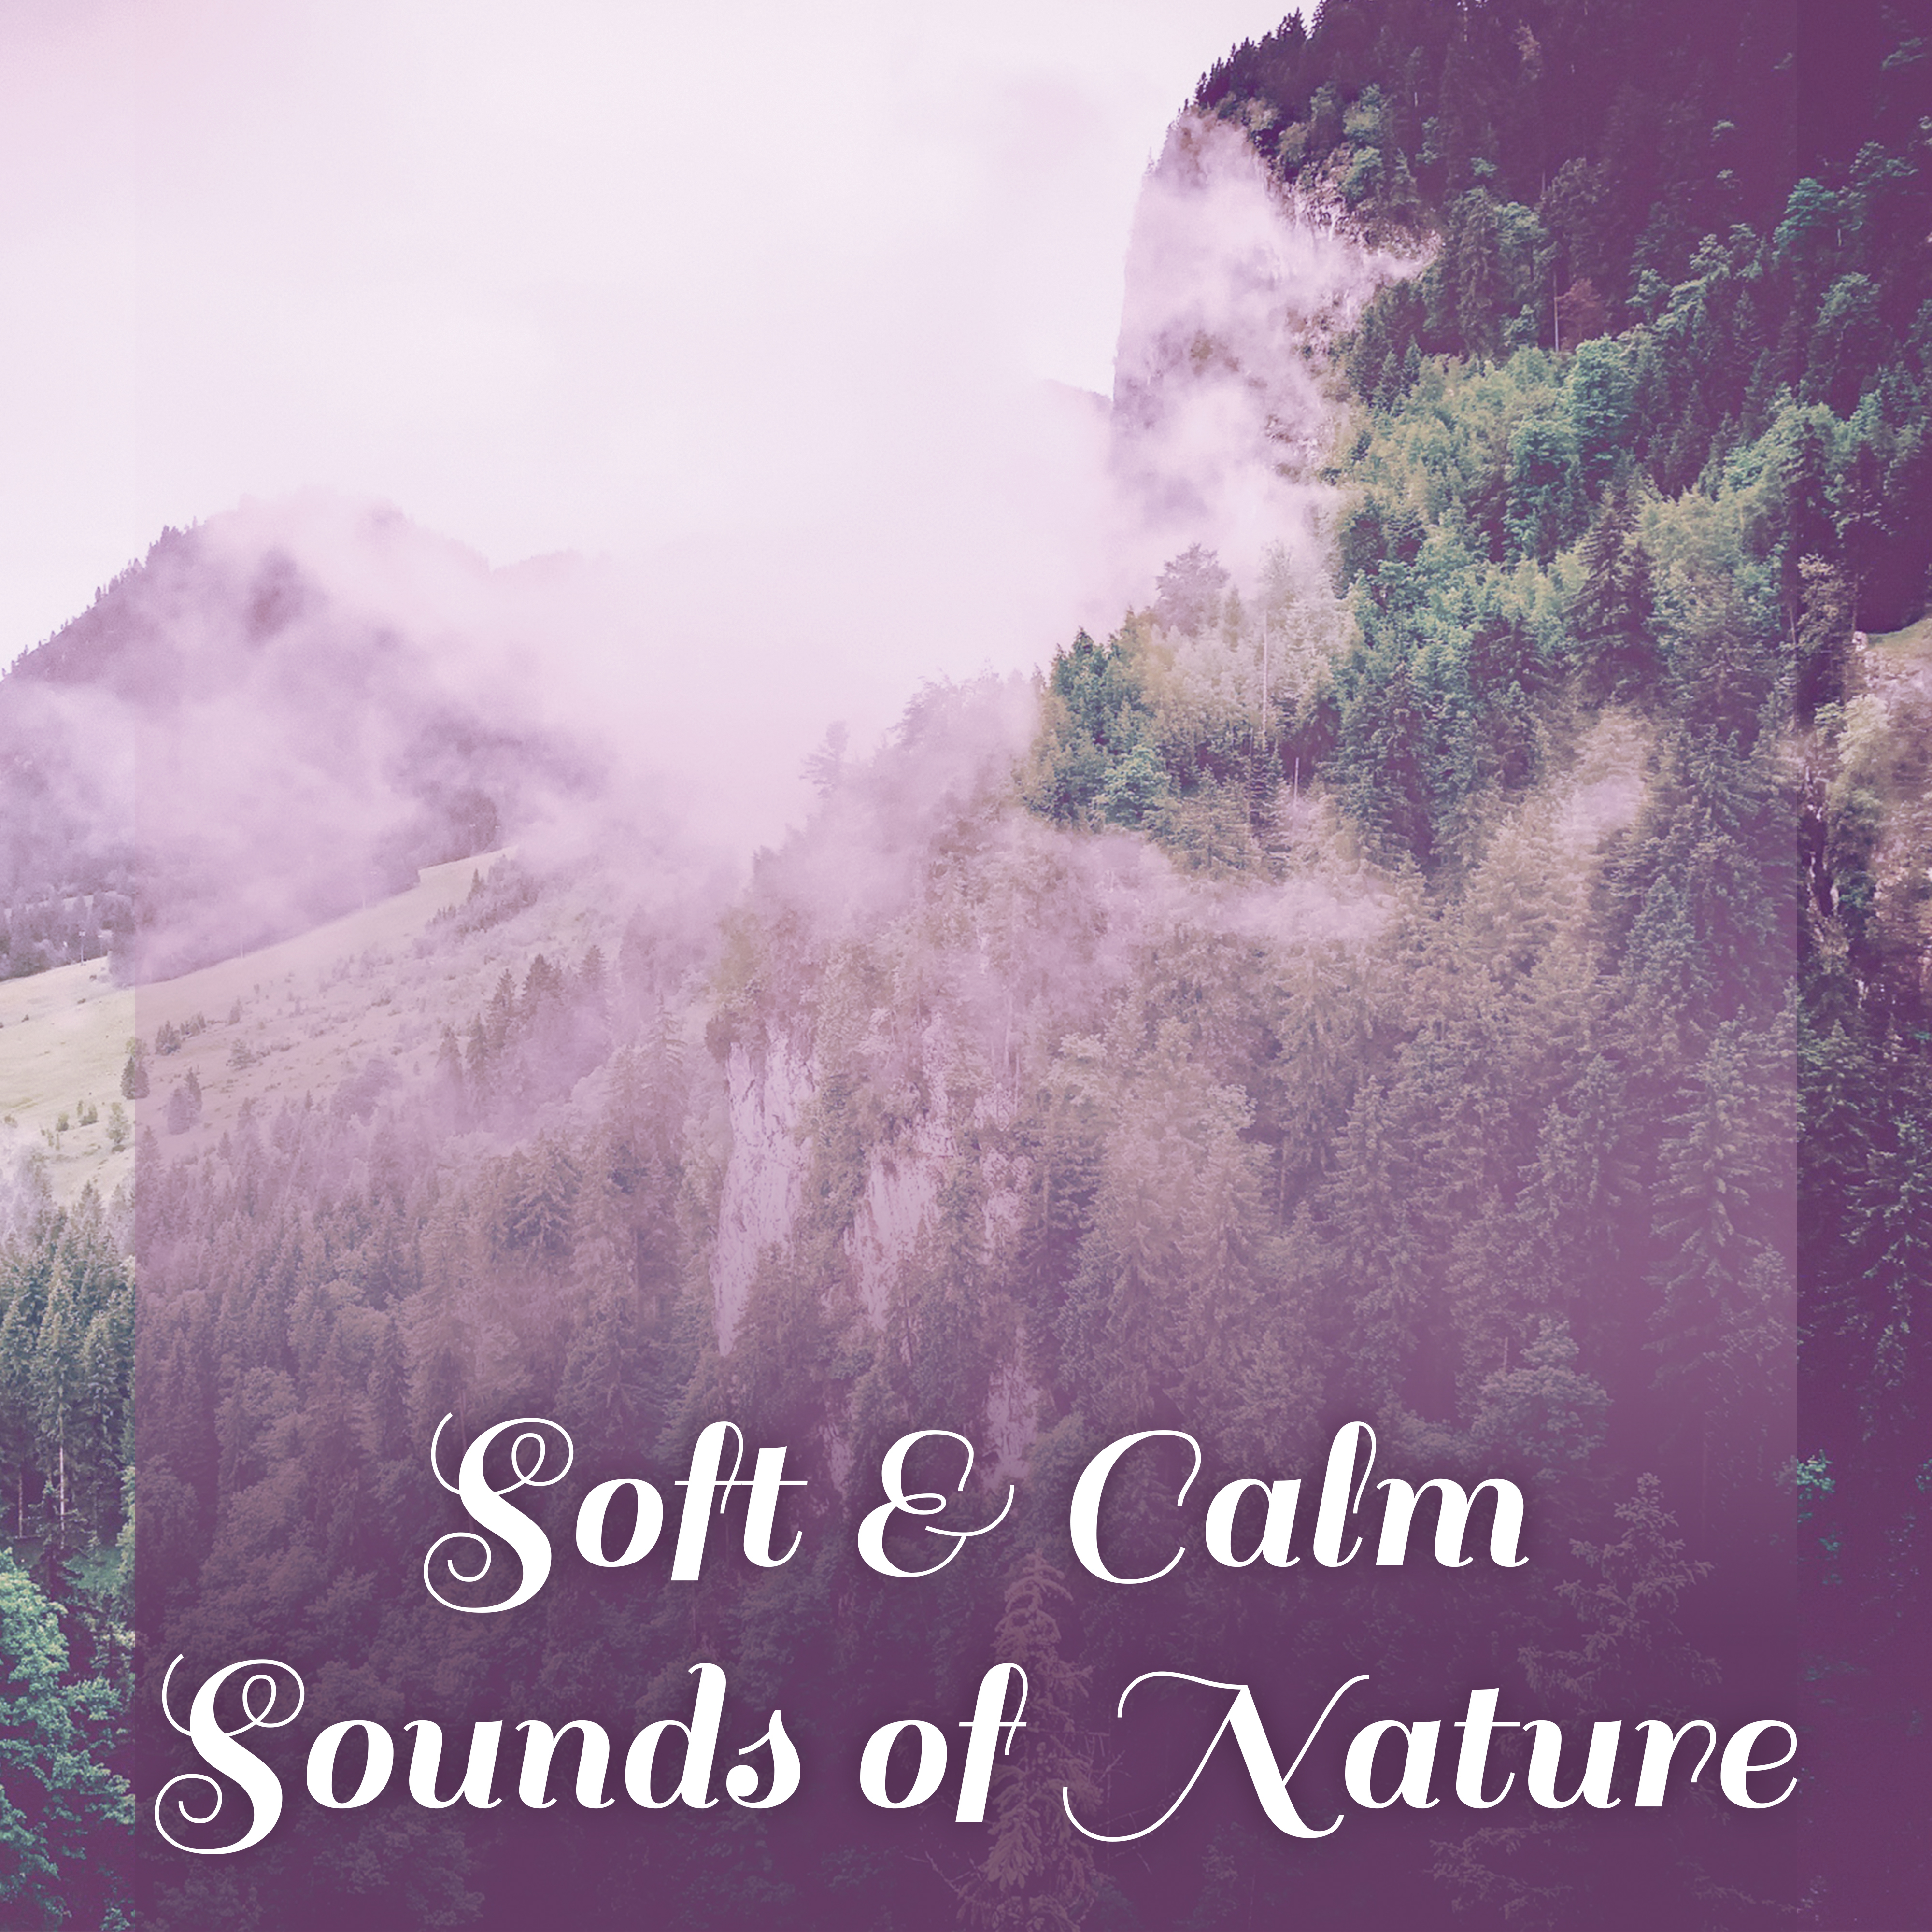 Soft & Calm Sounds of Nature – Rest & Relax, Easy Listening, New Age Relaxation, Soothing Sounds